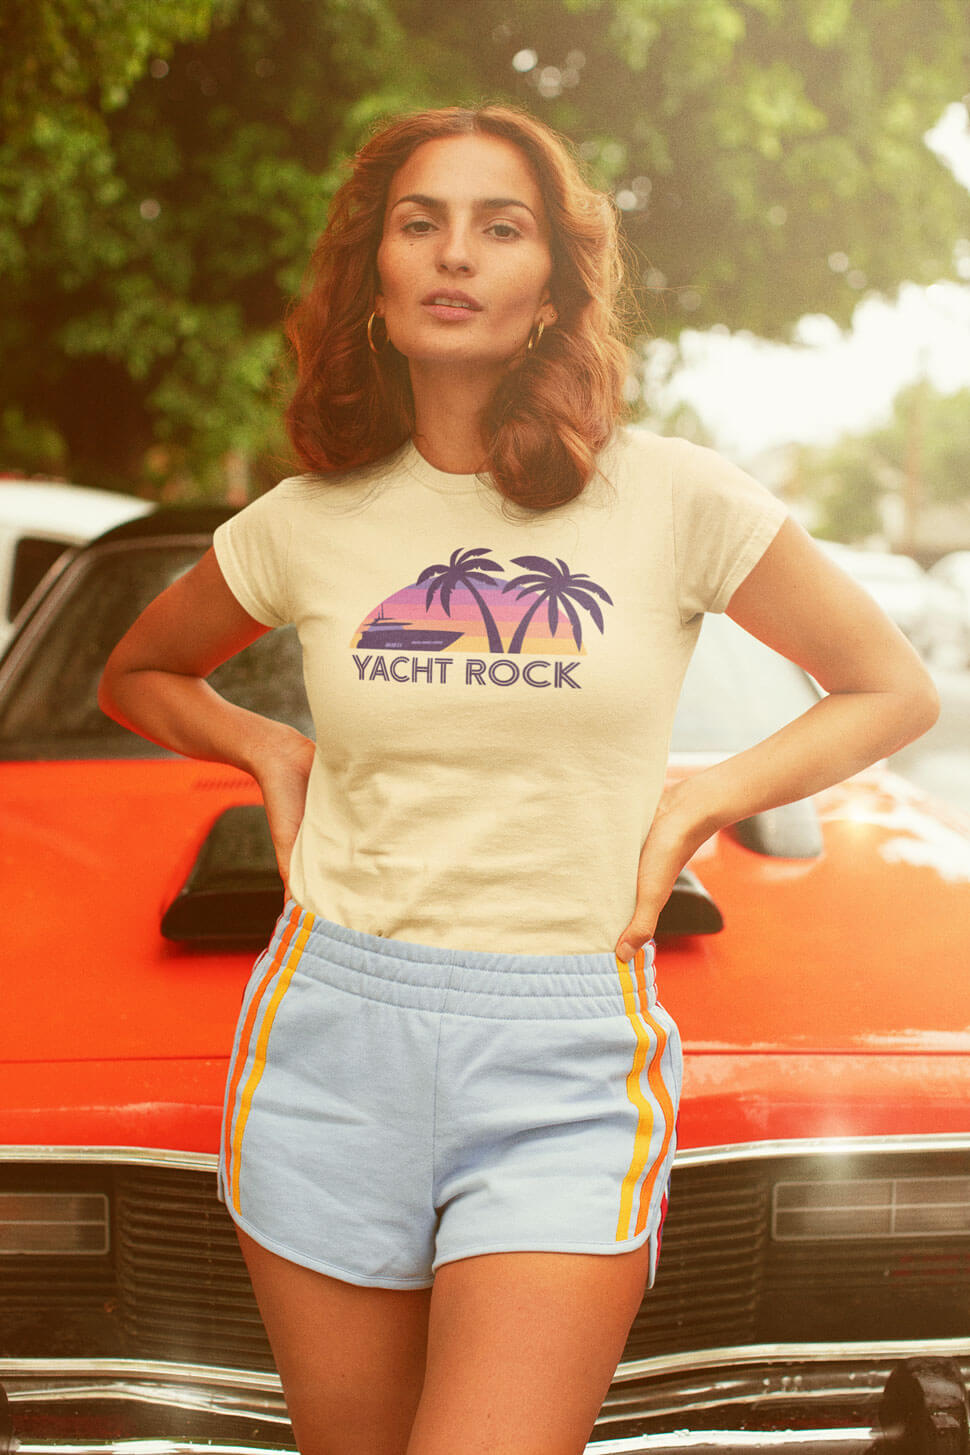 Woman leaning on classic car wearing A Yacht Rock Sunset tee shirt in the 1970's.